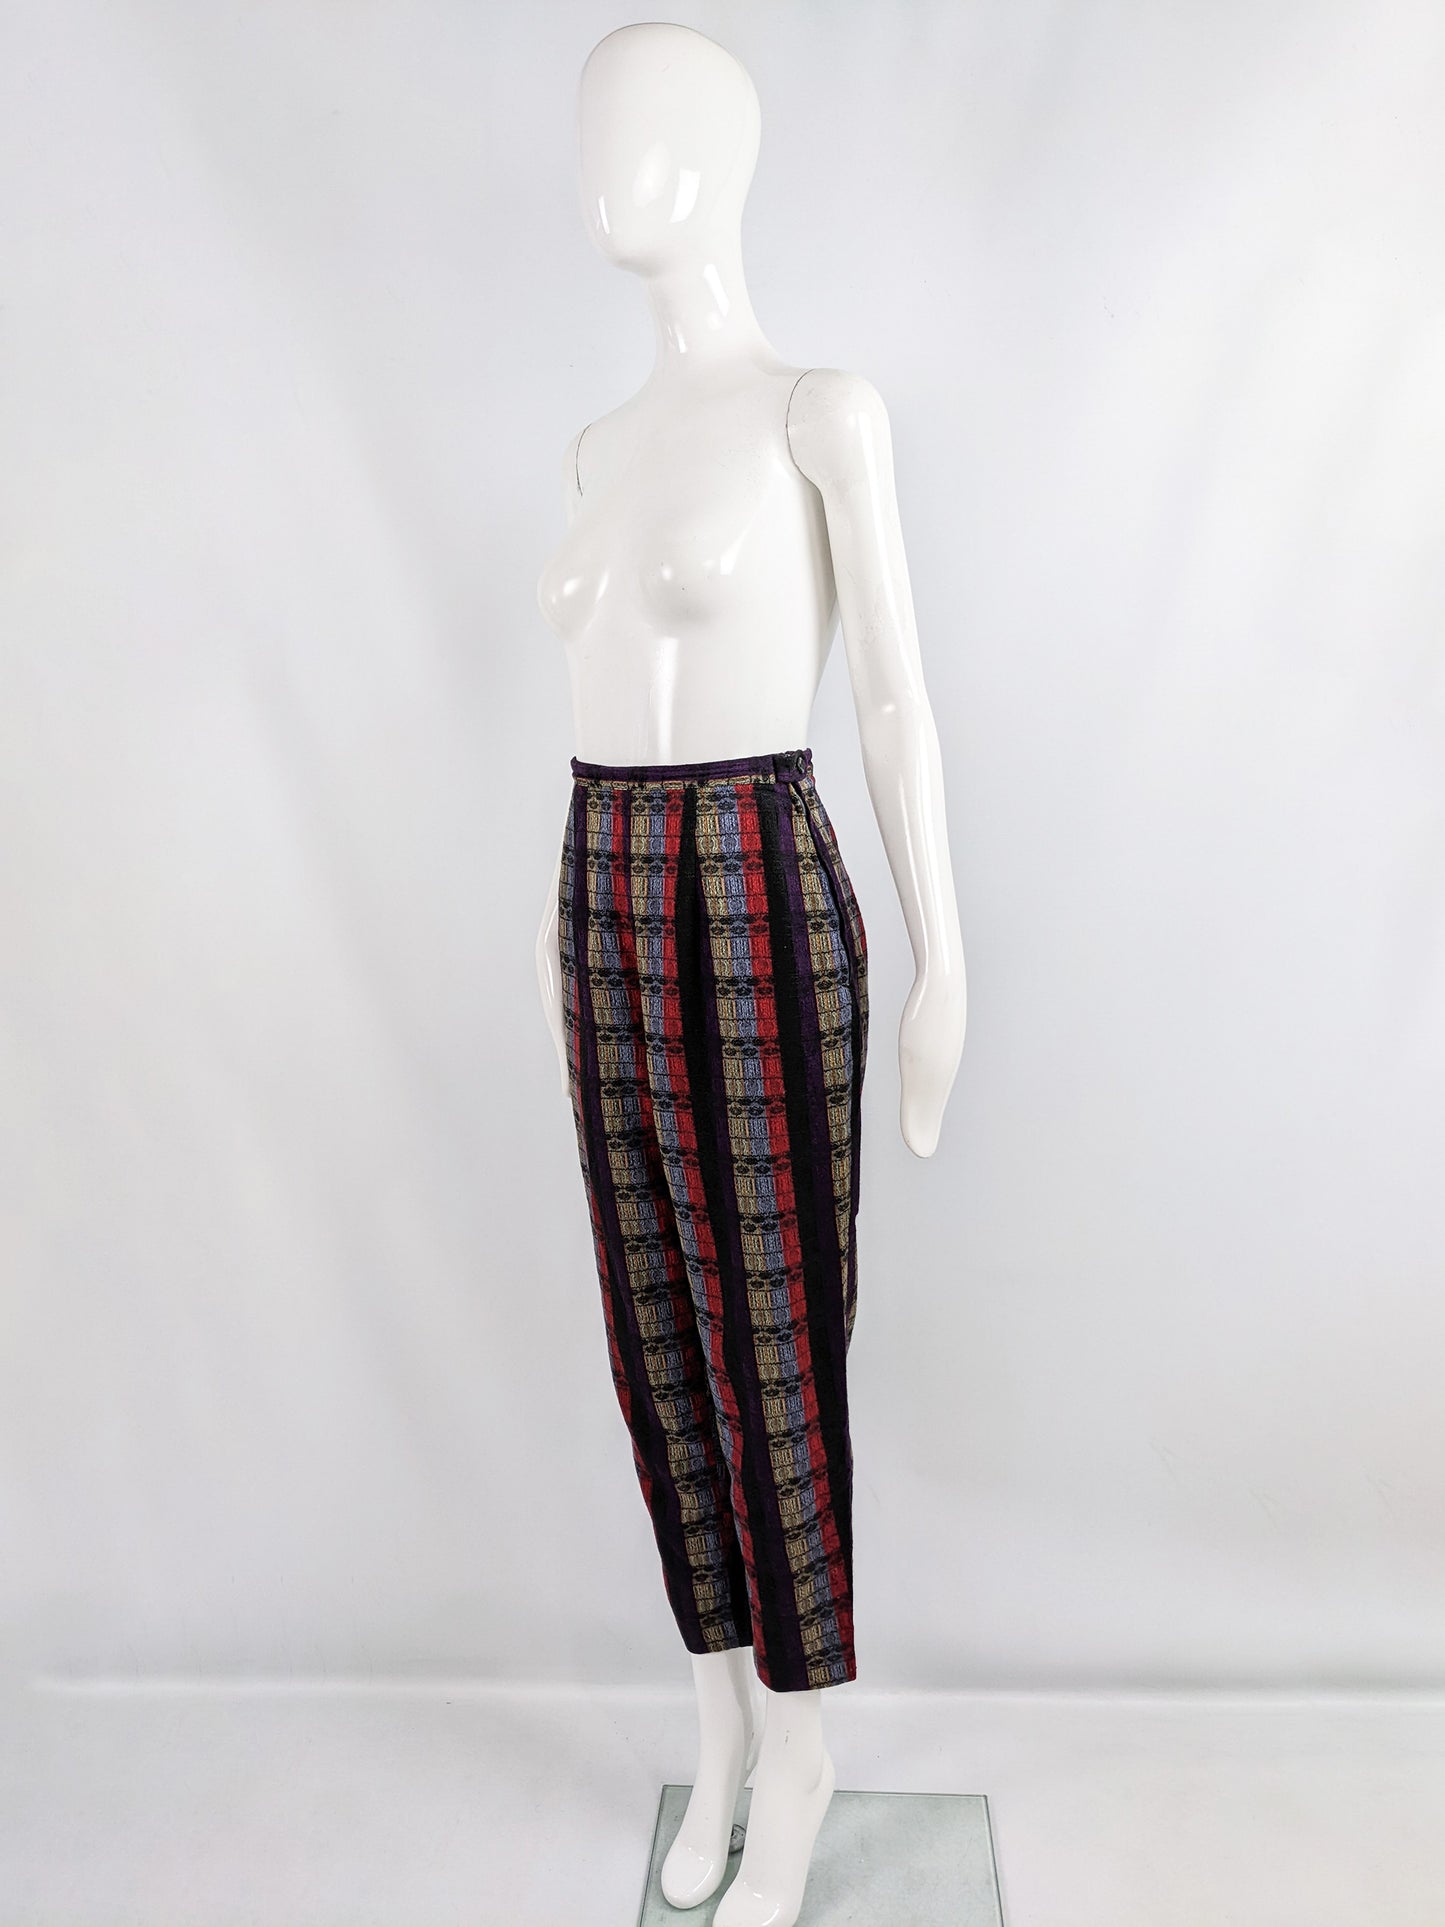 Shire Tex Vintage Multicoloured Woven Cotton High Waist Trousers, 1960s